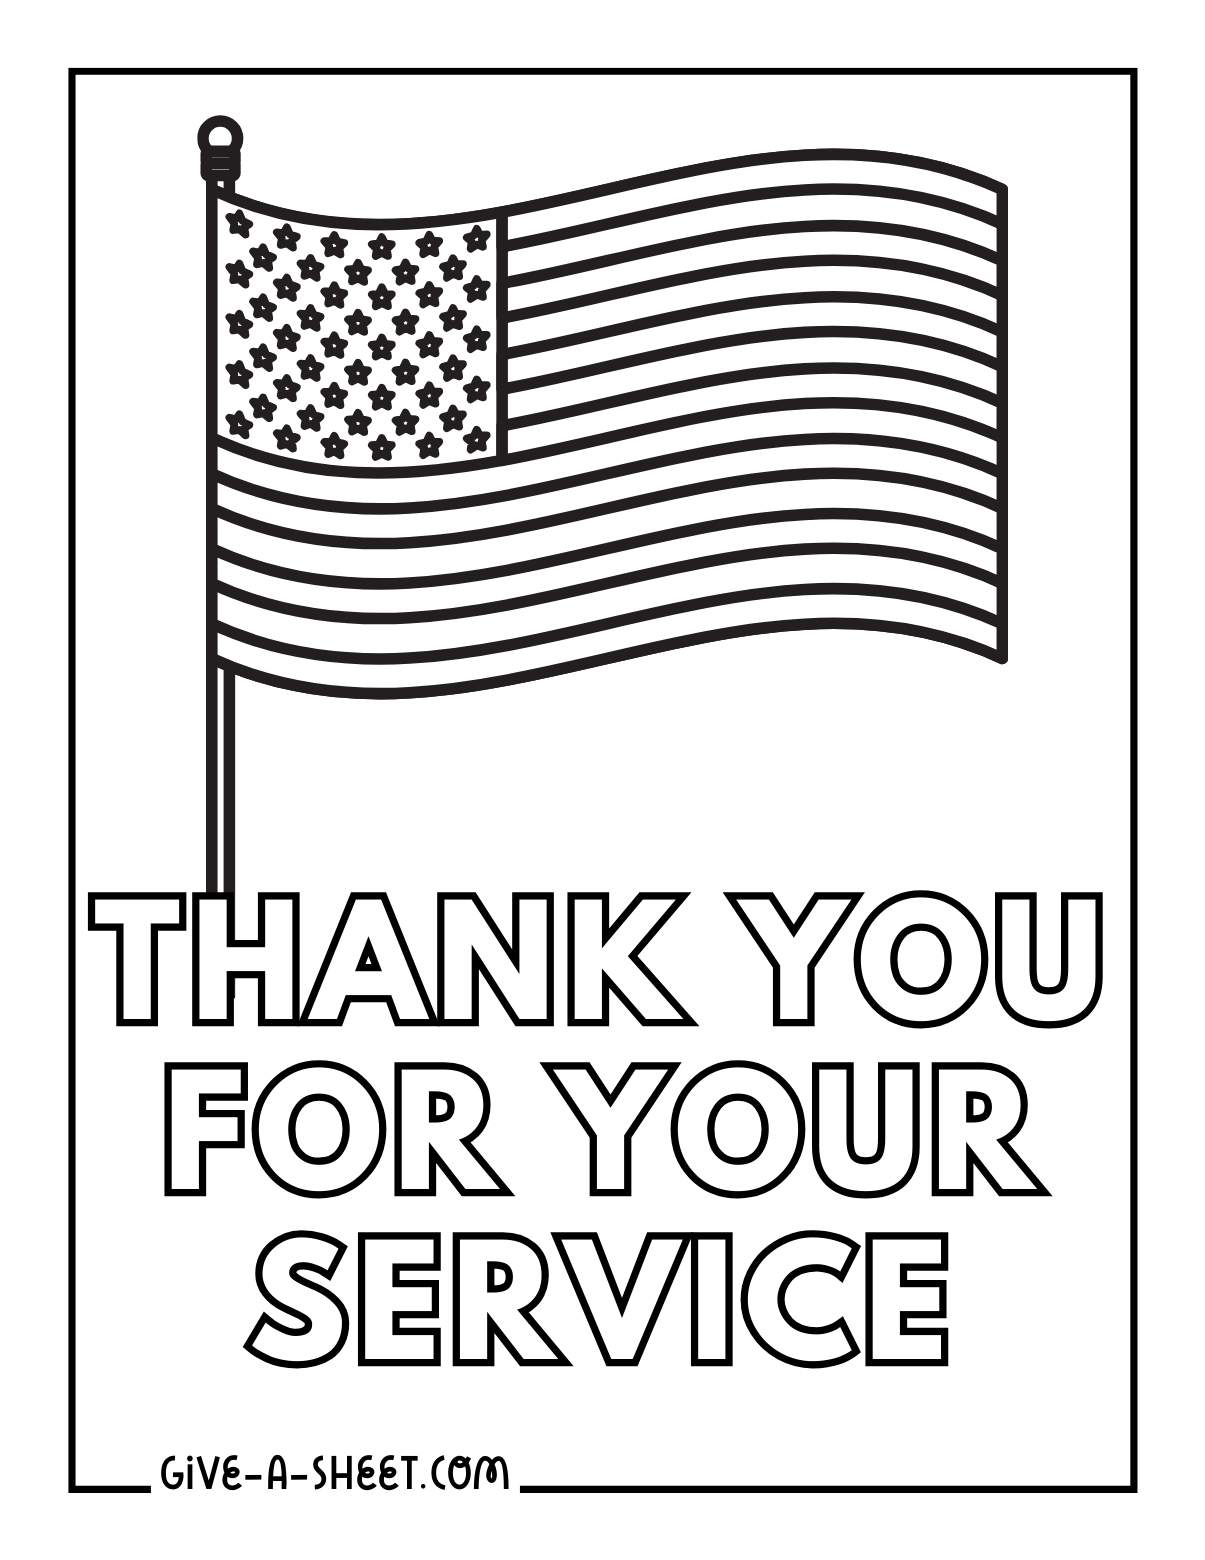 American flag for veterans day coloring page.